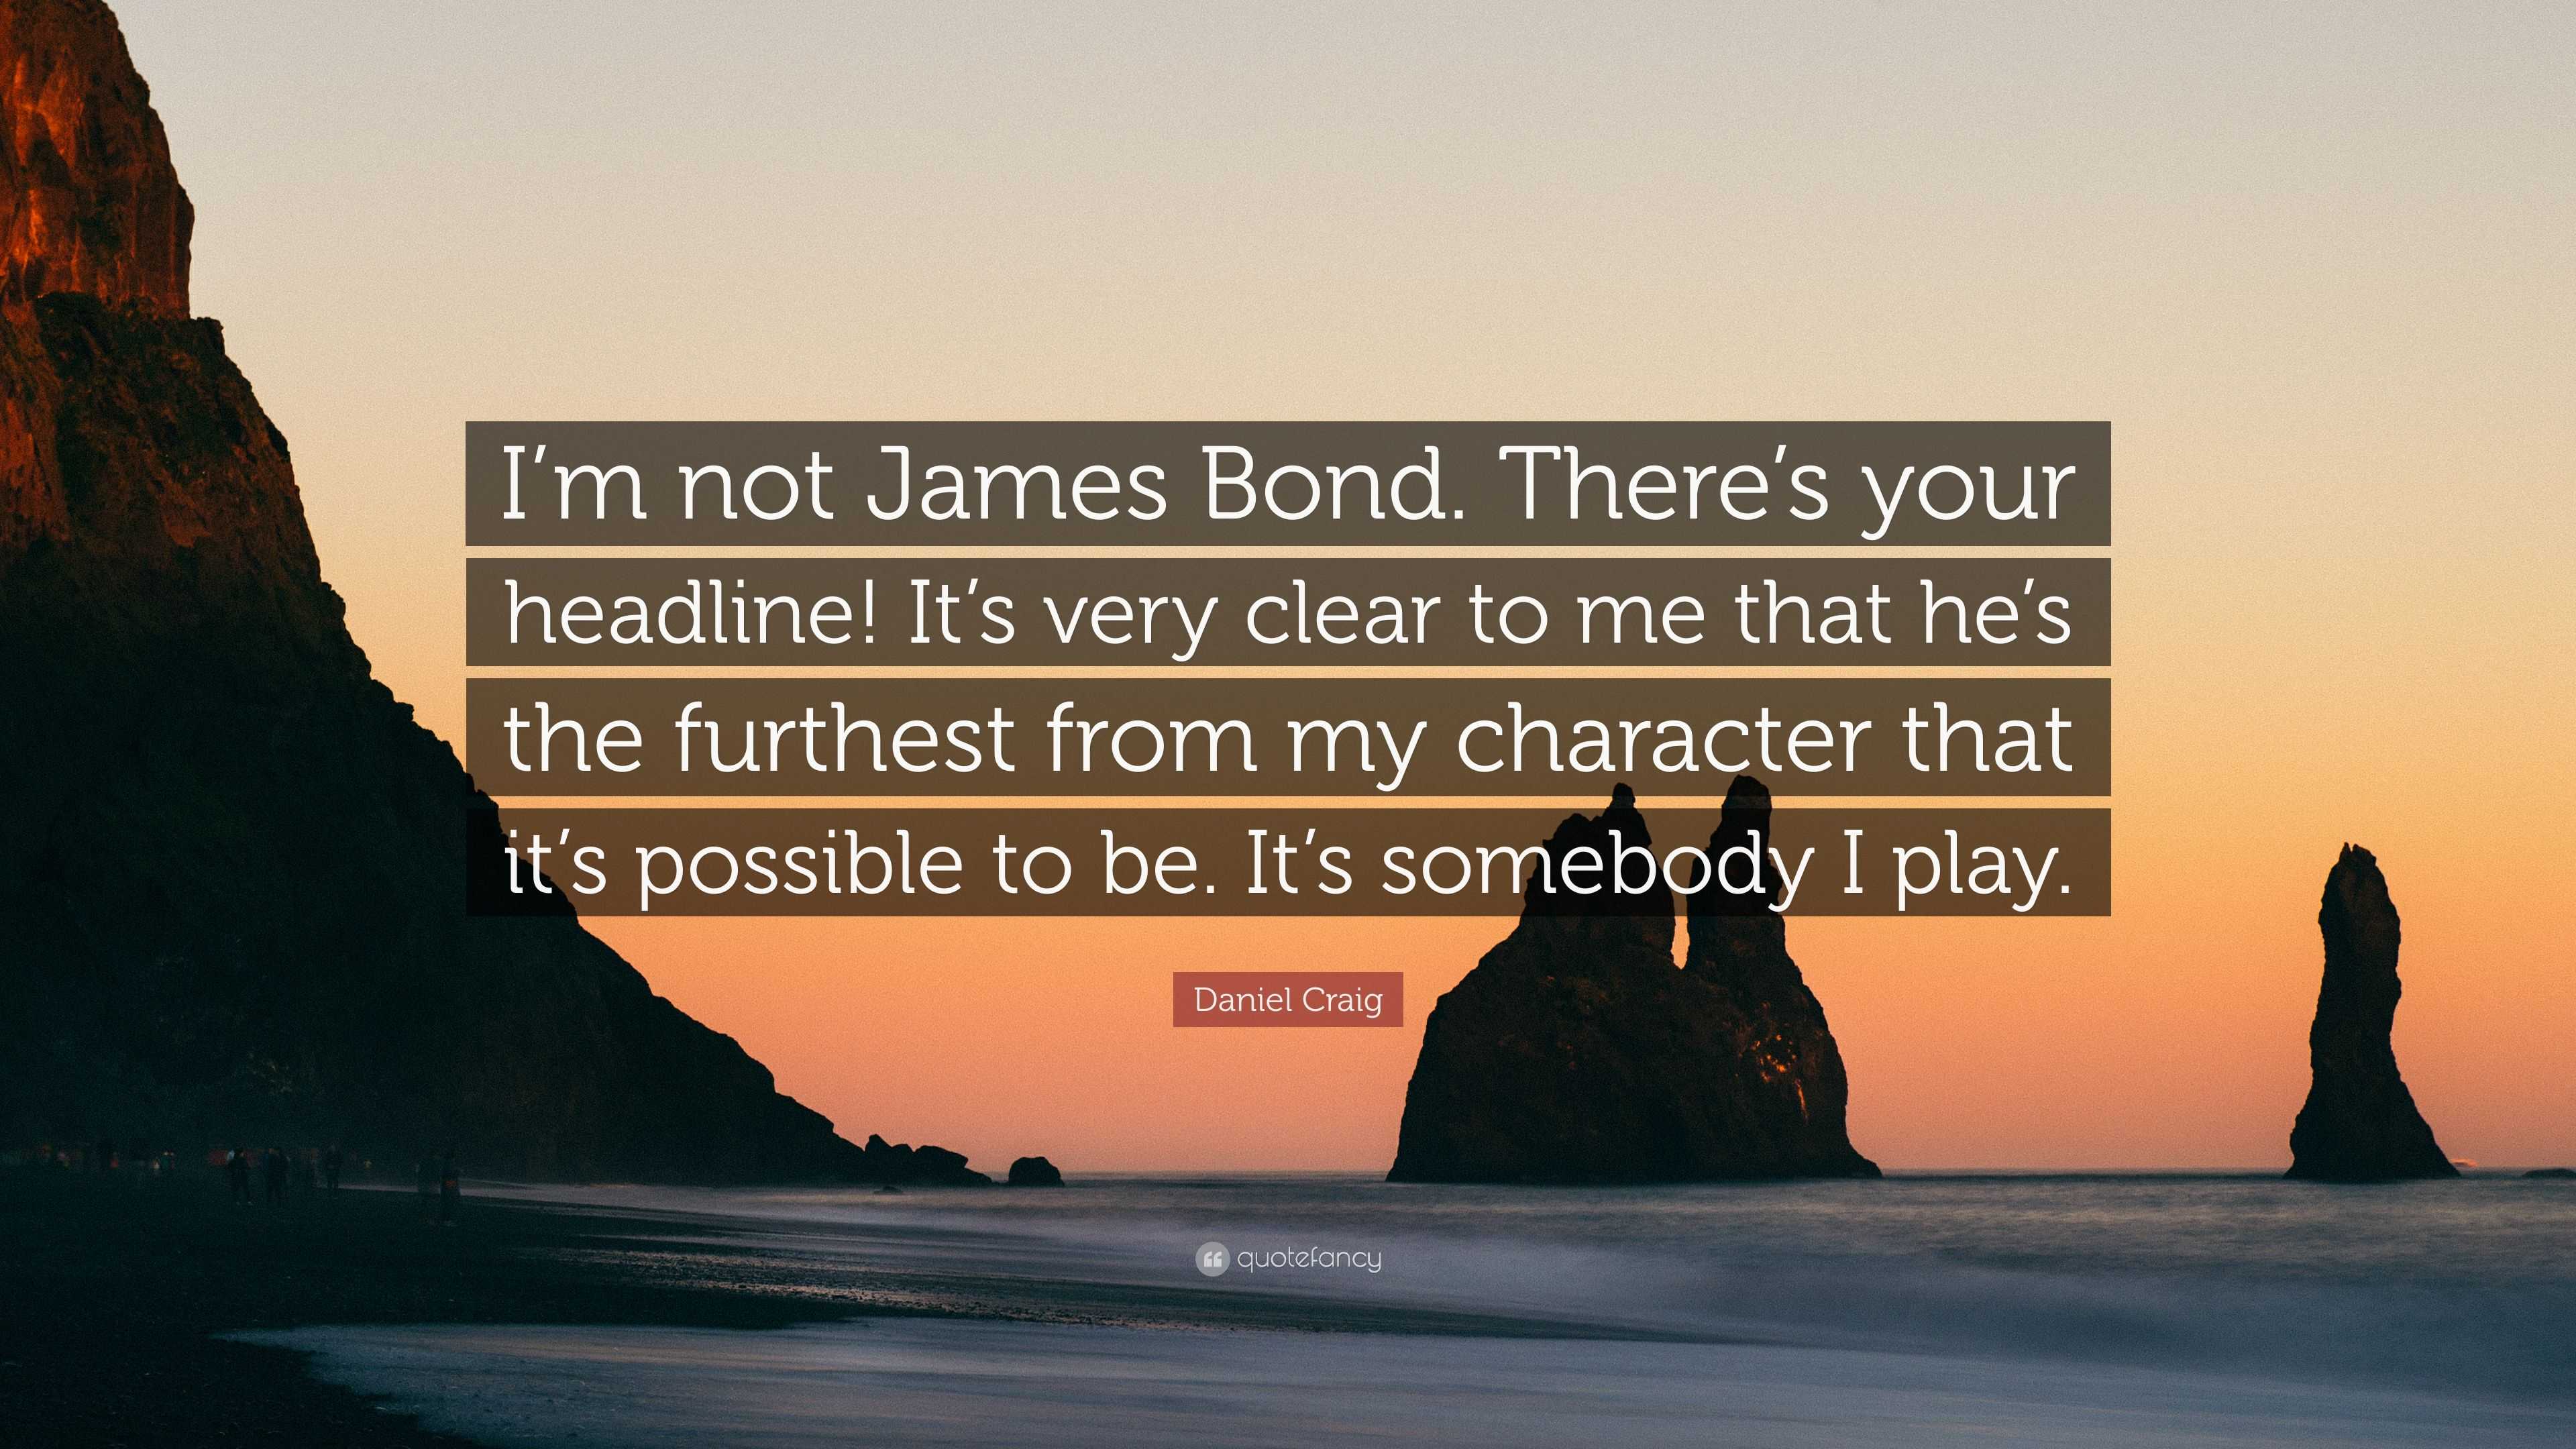 Daniel Craig Quote: “I'm not James Bond. There's your headline! It's very  clear to me that he's the furthest from my character that it's poss...”